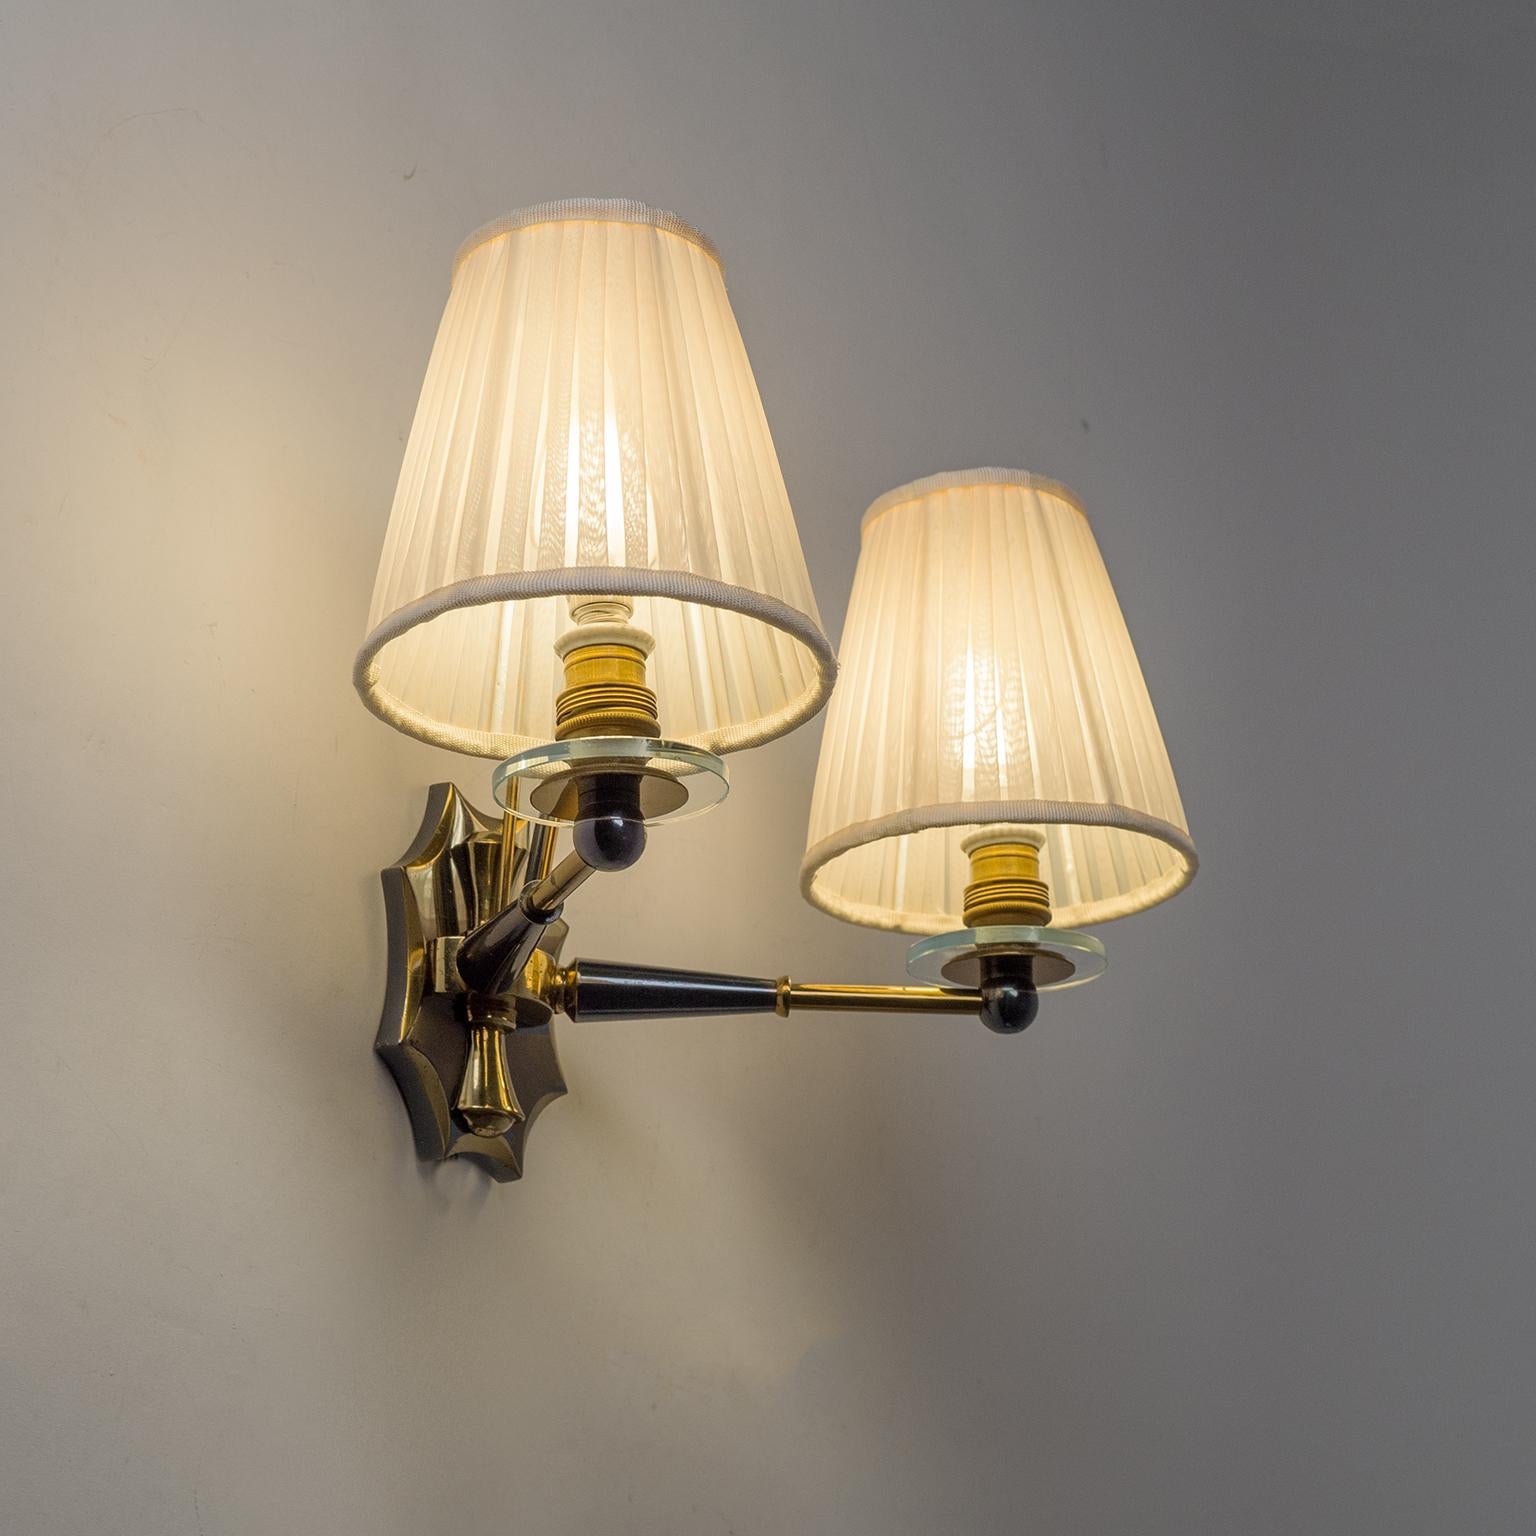 Mid-20th Century French Chandelier, circa 1950, Patinated Brass